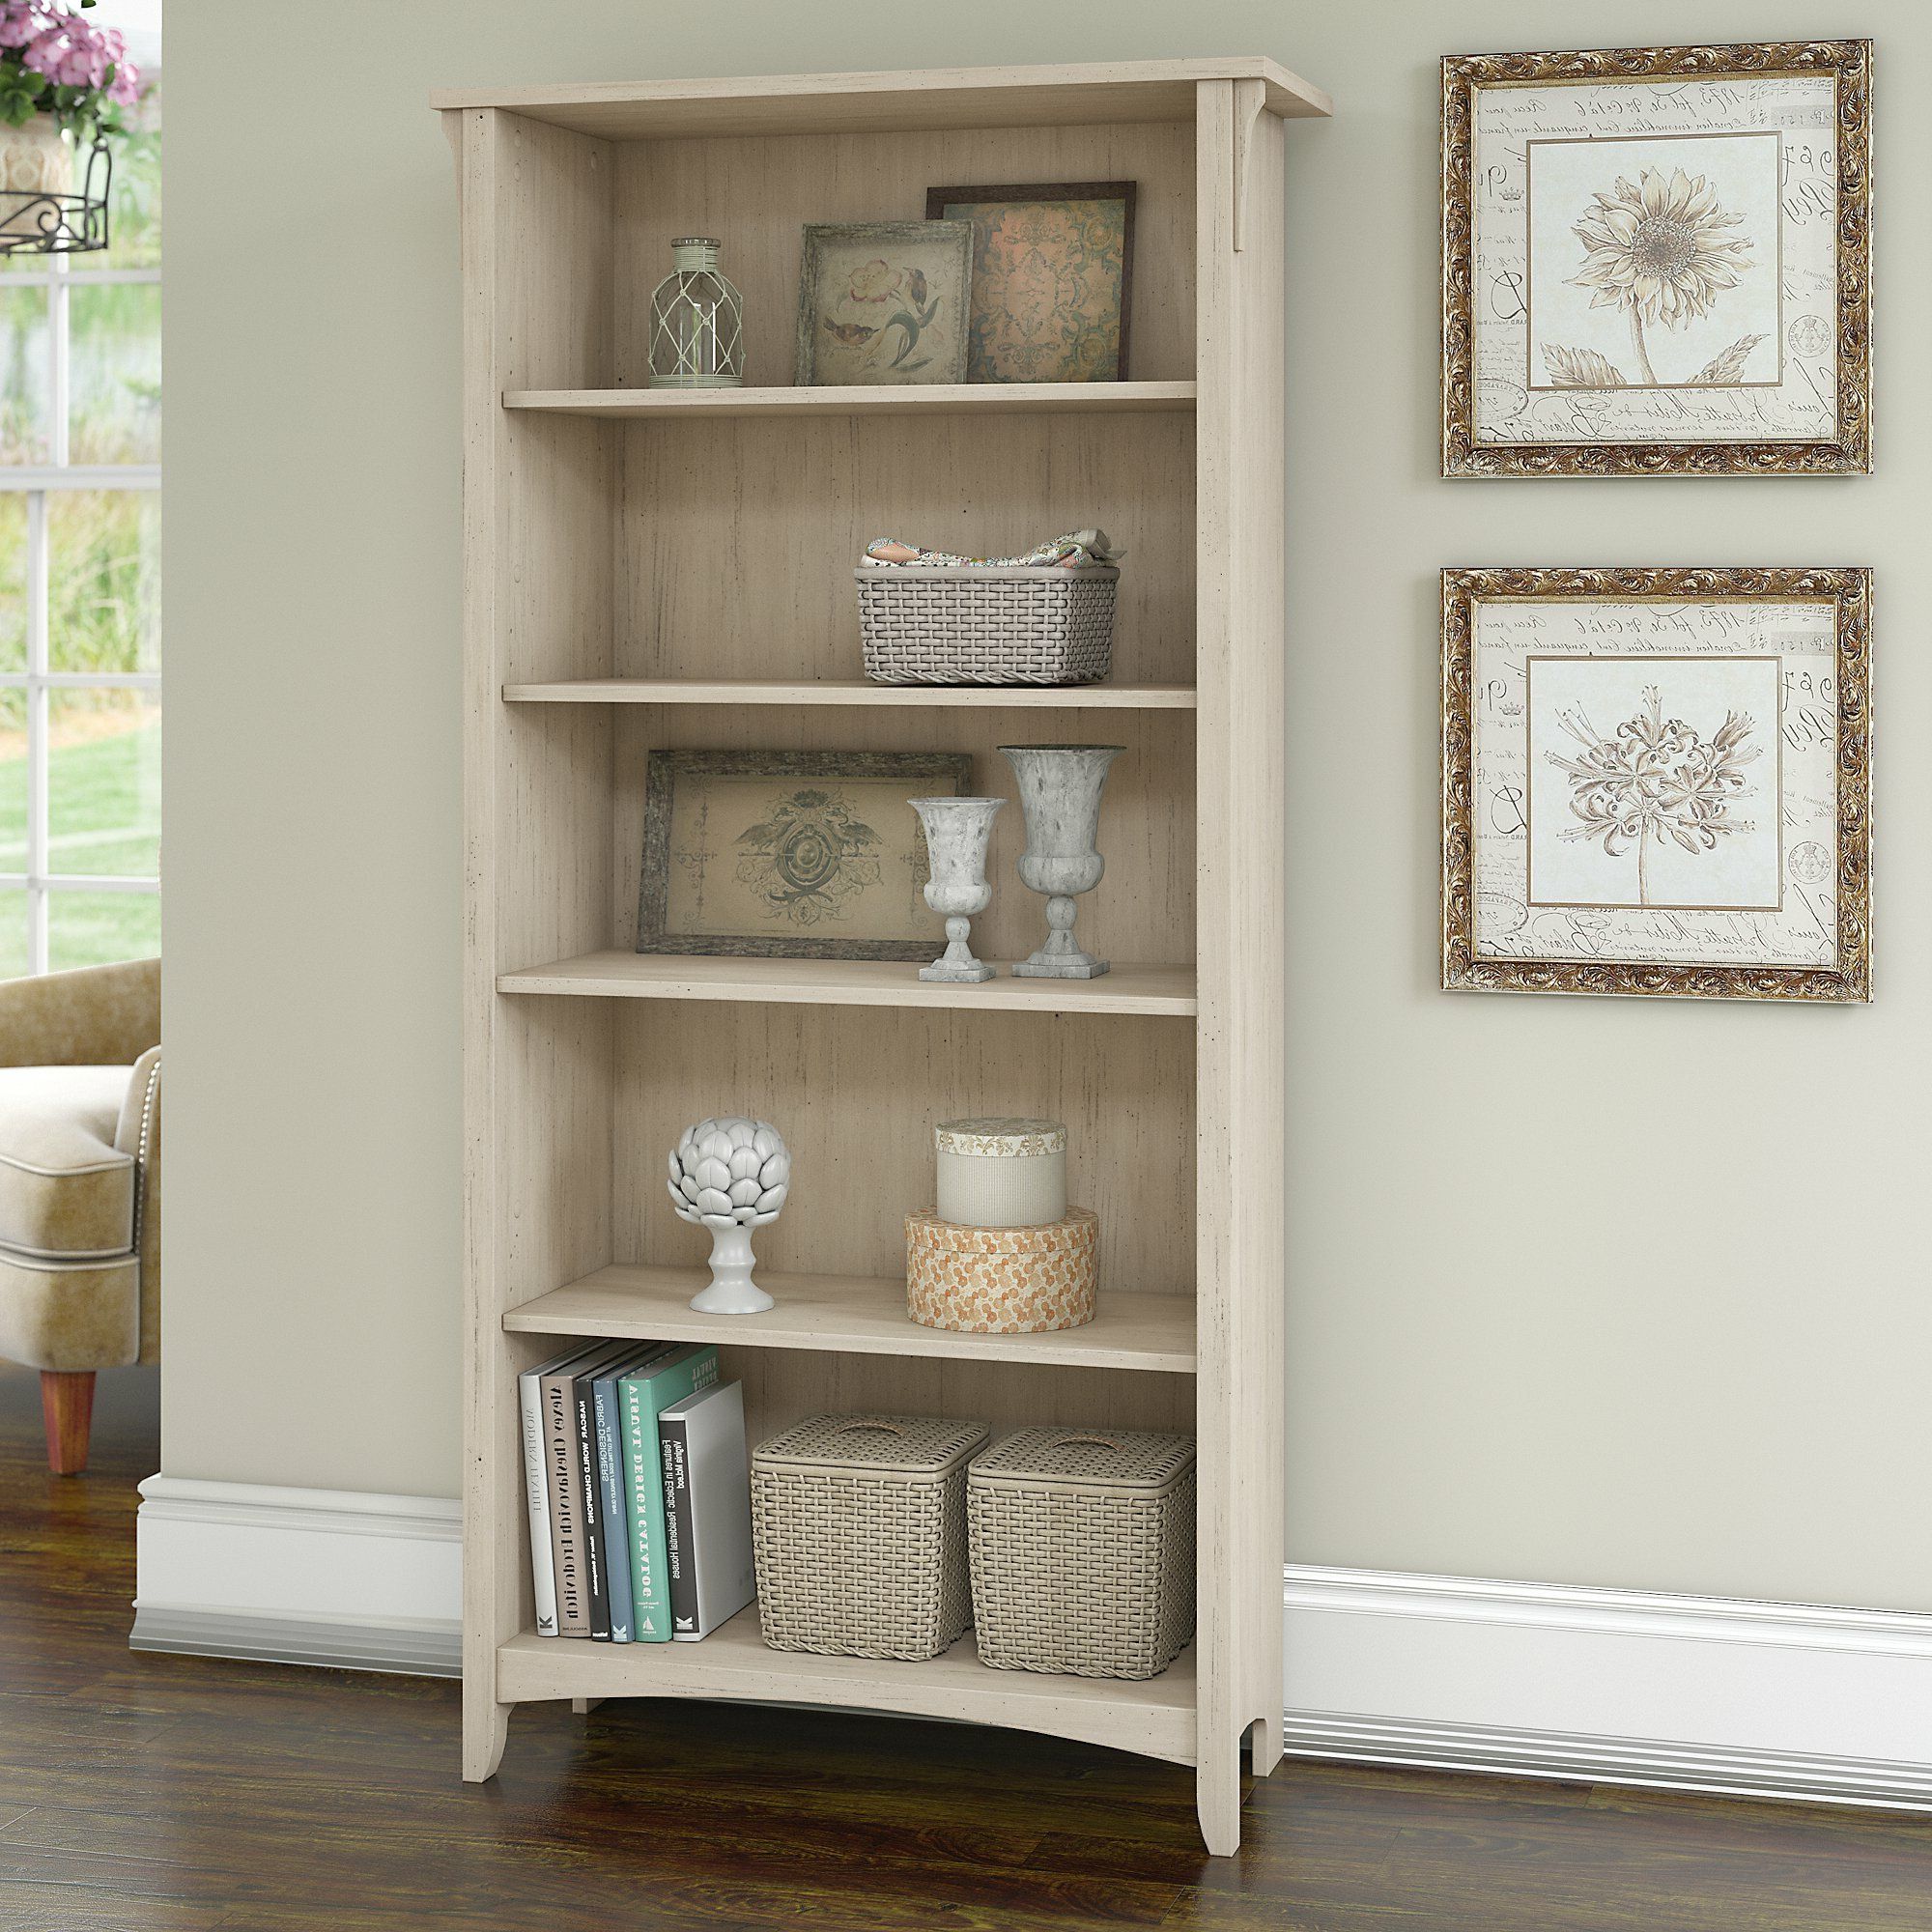 Pinellas Tall Standard Bookcases With Regard To Current Salina Standard Bookcase (View 16 of 20)